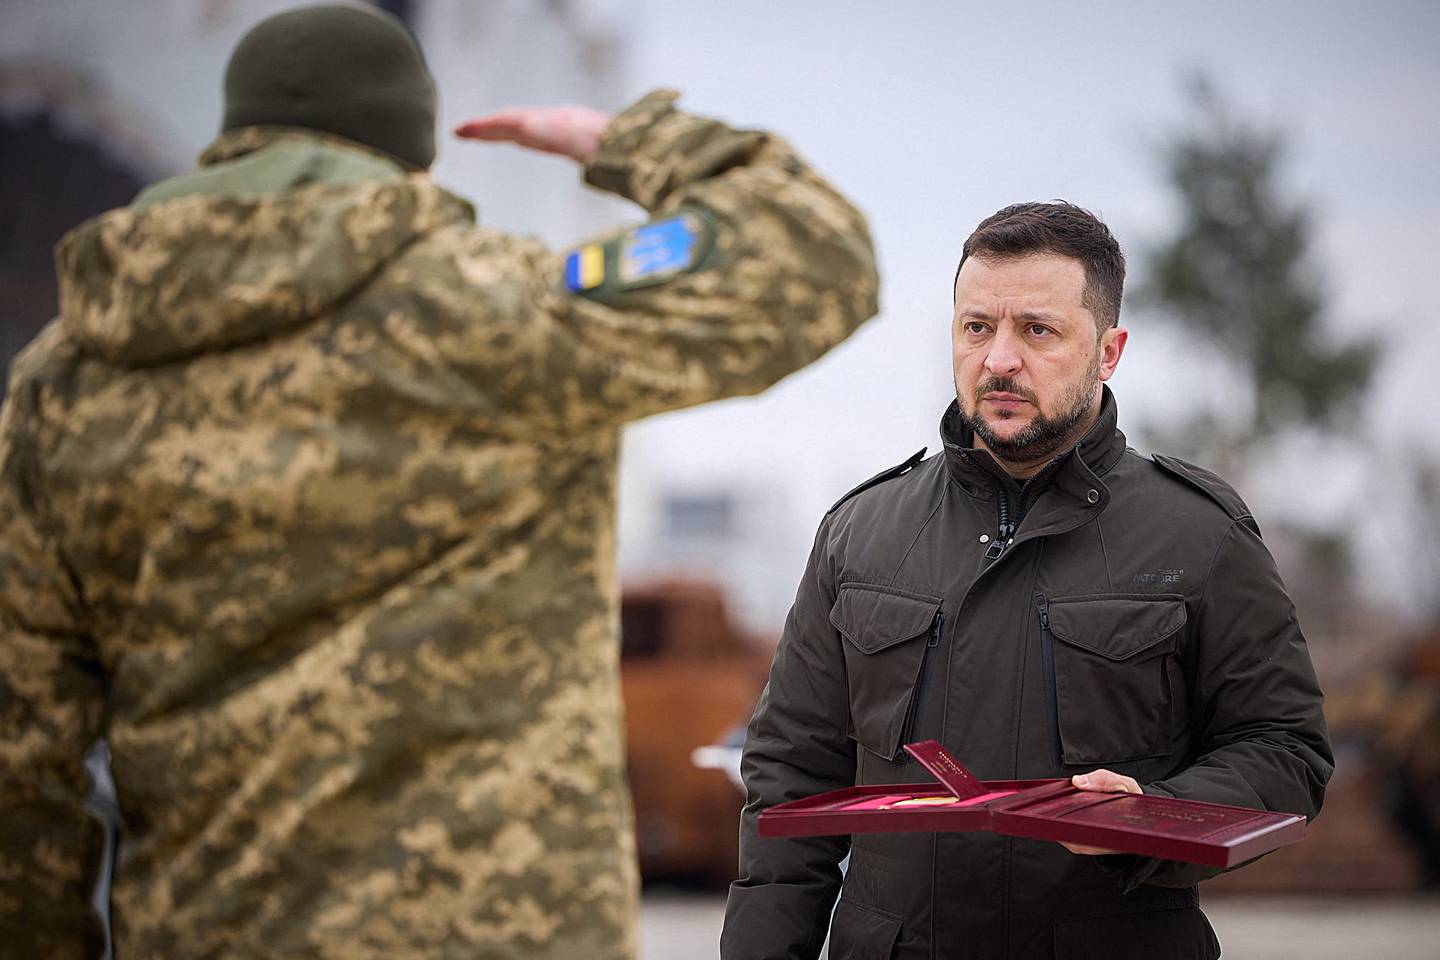 In this handout photograph taken and released by Ukrainian Presidential Press Service on February 24, 2024, Ukraine's President Volodymyr Zelensky gives an award to a Ukrainian serviceman during a ceremony marking the second anniversary of the Russian invasion of Ukraine in Hostomel, Kyiv region. (Photo by Handout / UKRAINIAN PRESIDENTIAL PRESS SERVICE / AFP) / RESTRICTED TO EDITORIAL USE - MANDATORY CREDIT "AFP PHOTO / UKRAINIAN PRESIDENTIAL PRESS SERVICE " - NO MARKETING NO ADVERTISING CAMPAIGNS - DISTRIBUTED AS A SERVICE TO CLIENTS